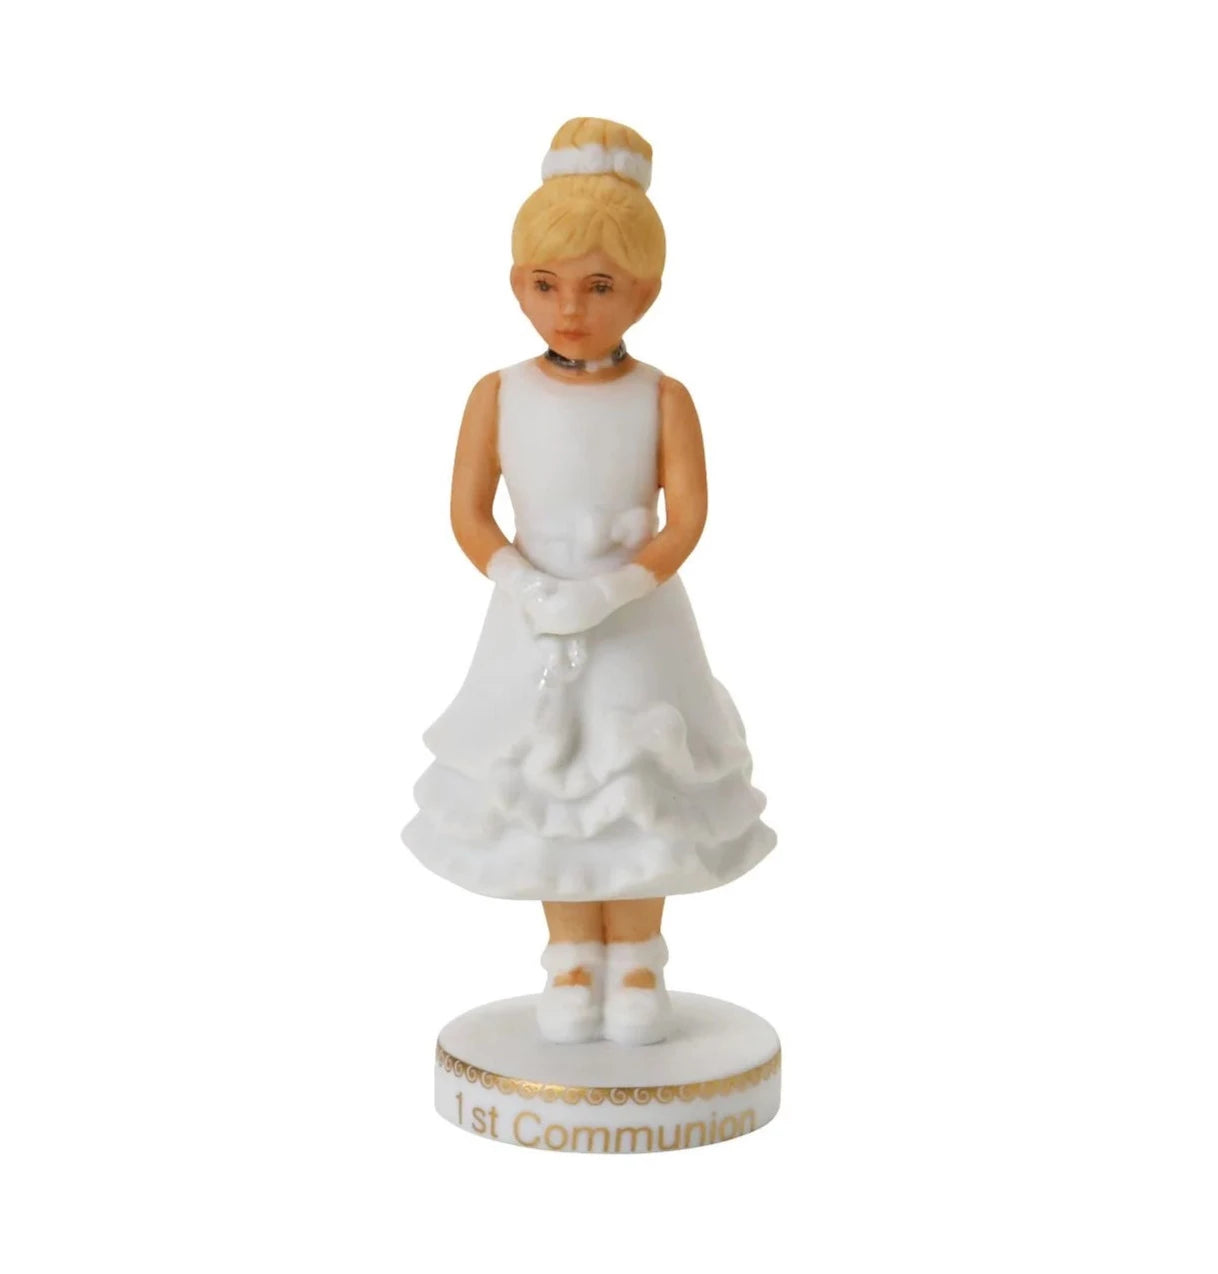 Growing up Girl Blonde 1st Communion